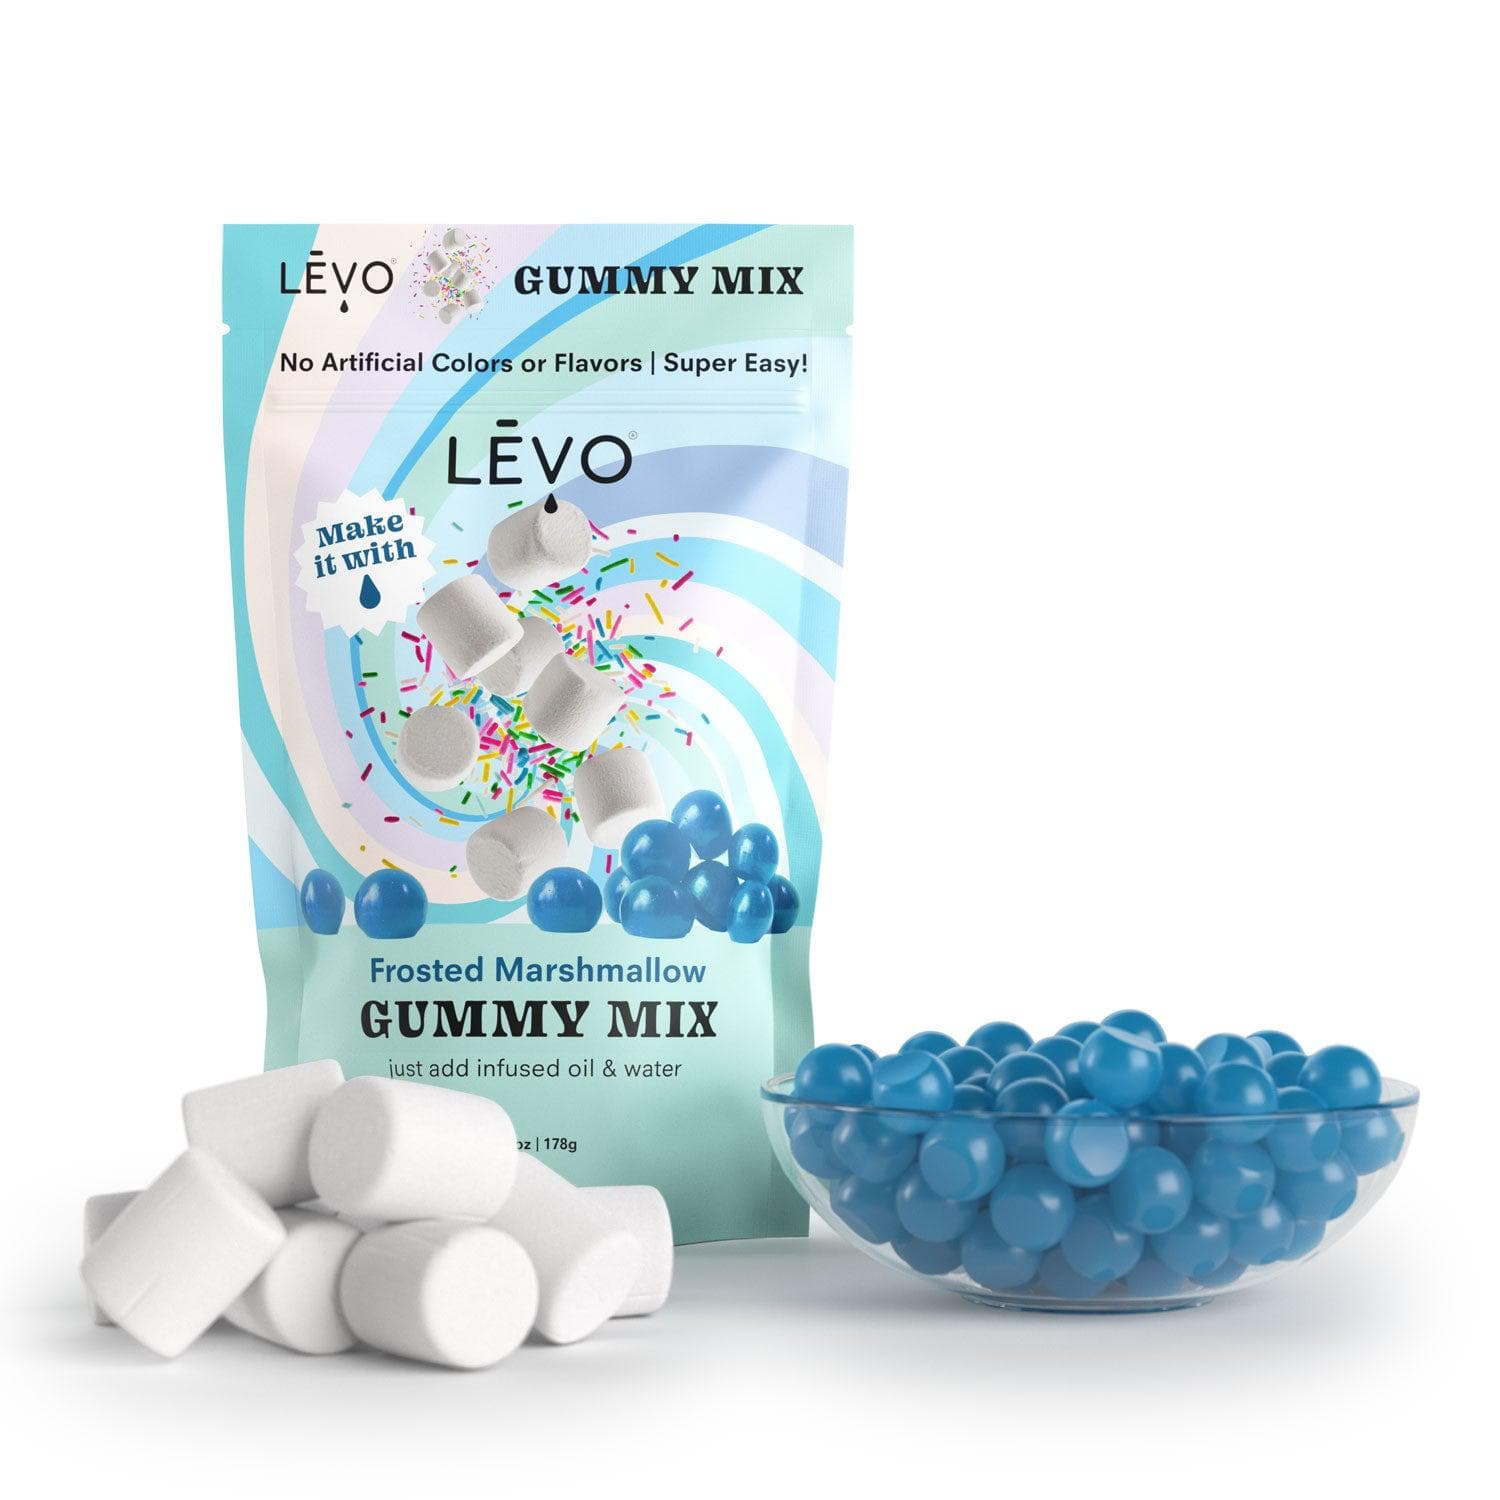 Frosted Marshmallow gummy mix, made with all natural colors and flavors. Make your own dosed edible gummies at home, and save 10x the cost of buying pre-made. LEVO pays for itself compared to buying tinctures and gummies at the store.